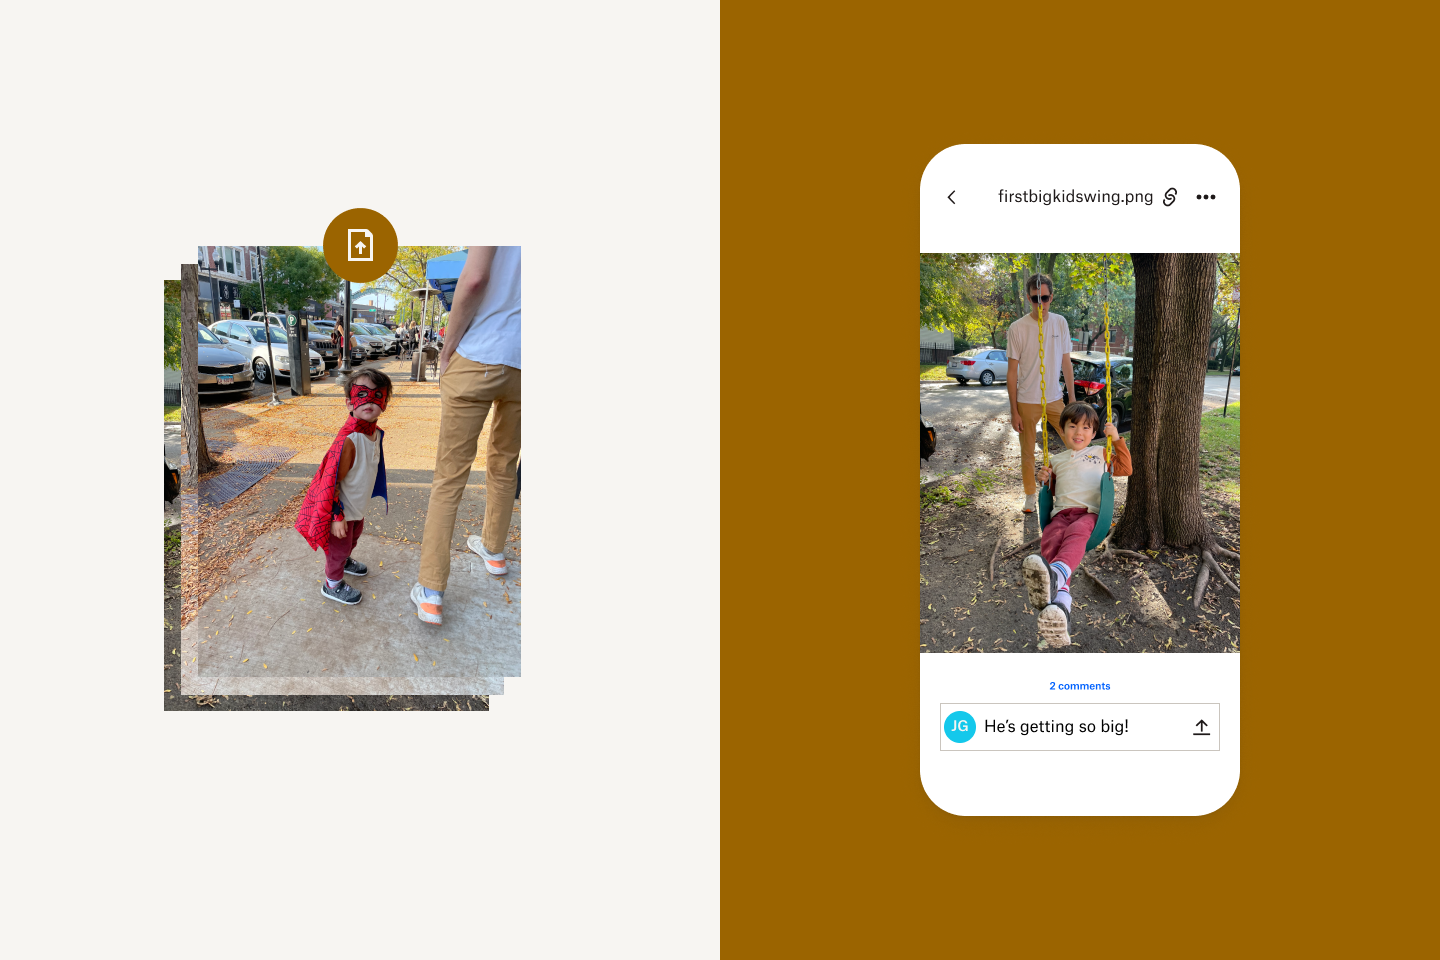 Upload photos and leave comments directly within the Dropbox mobile app